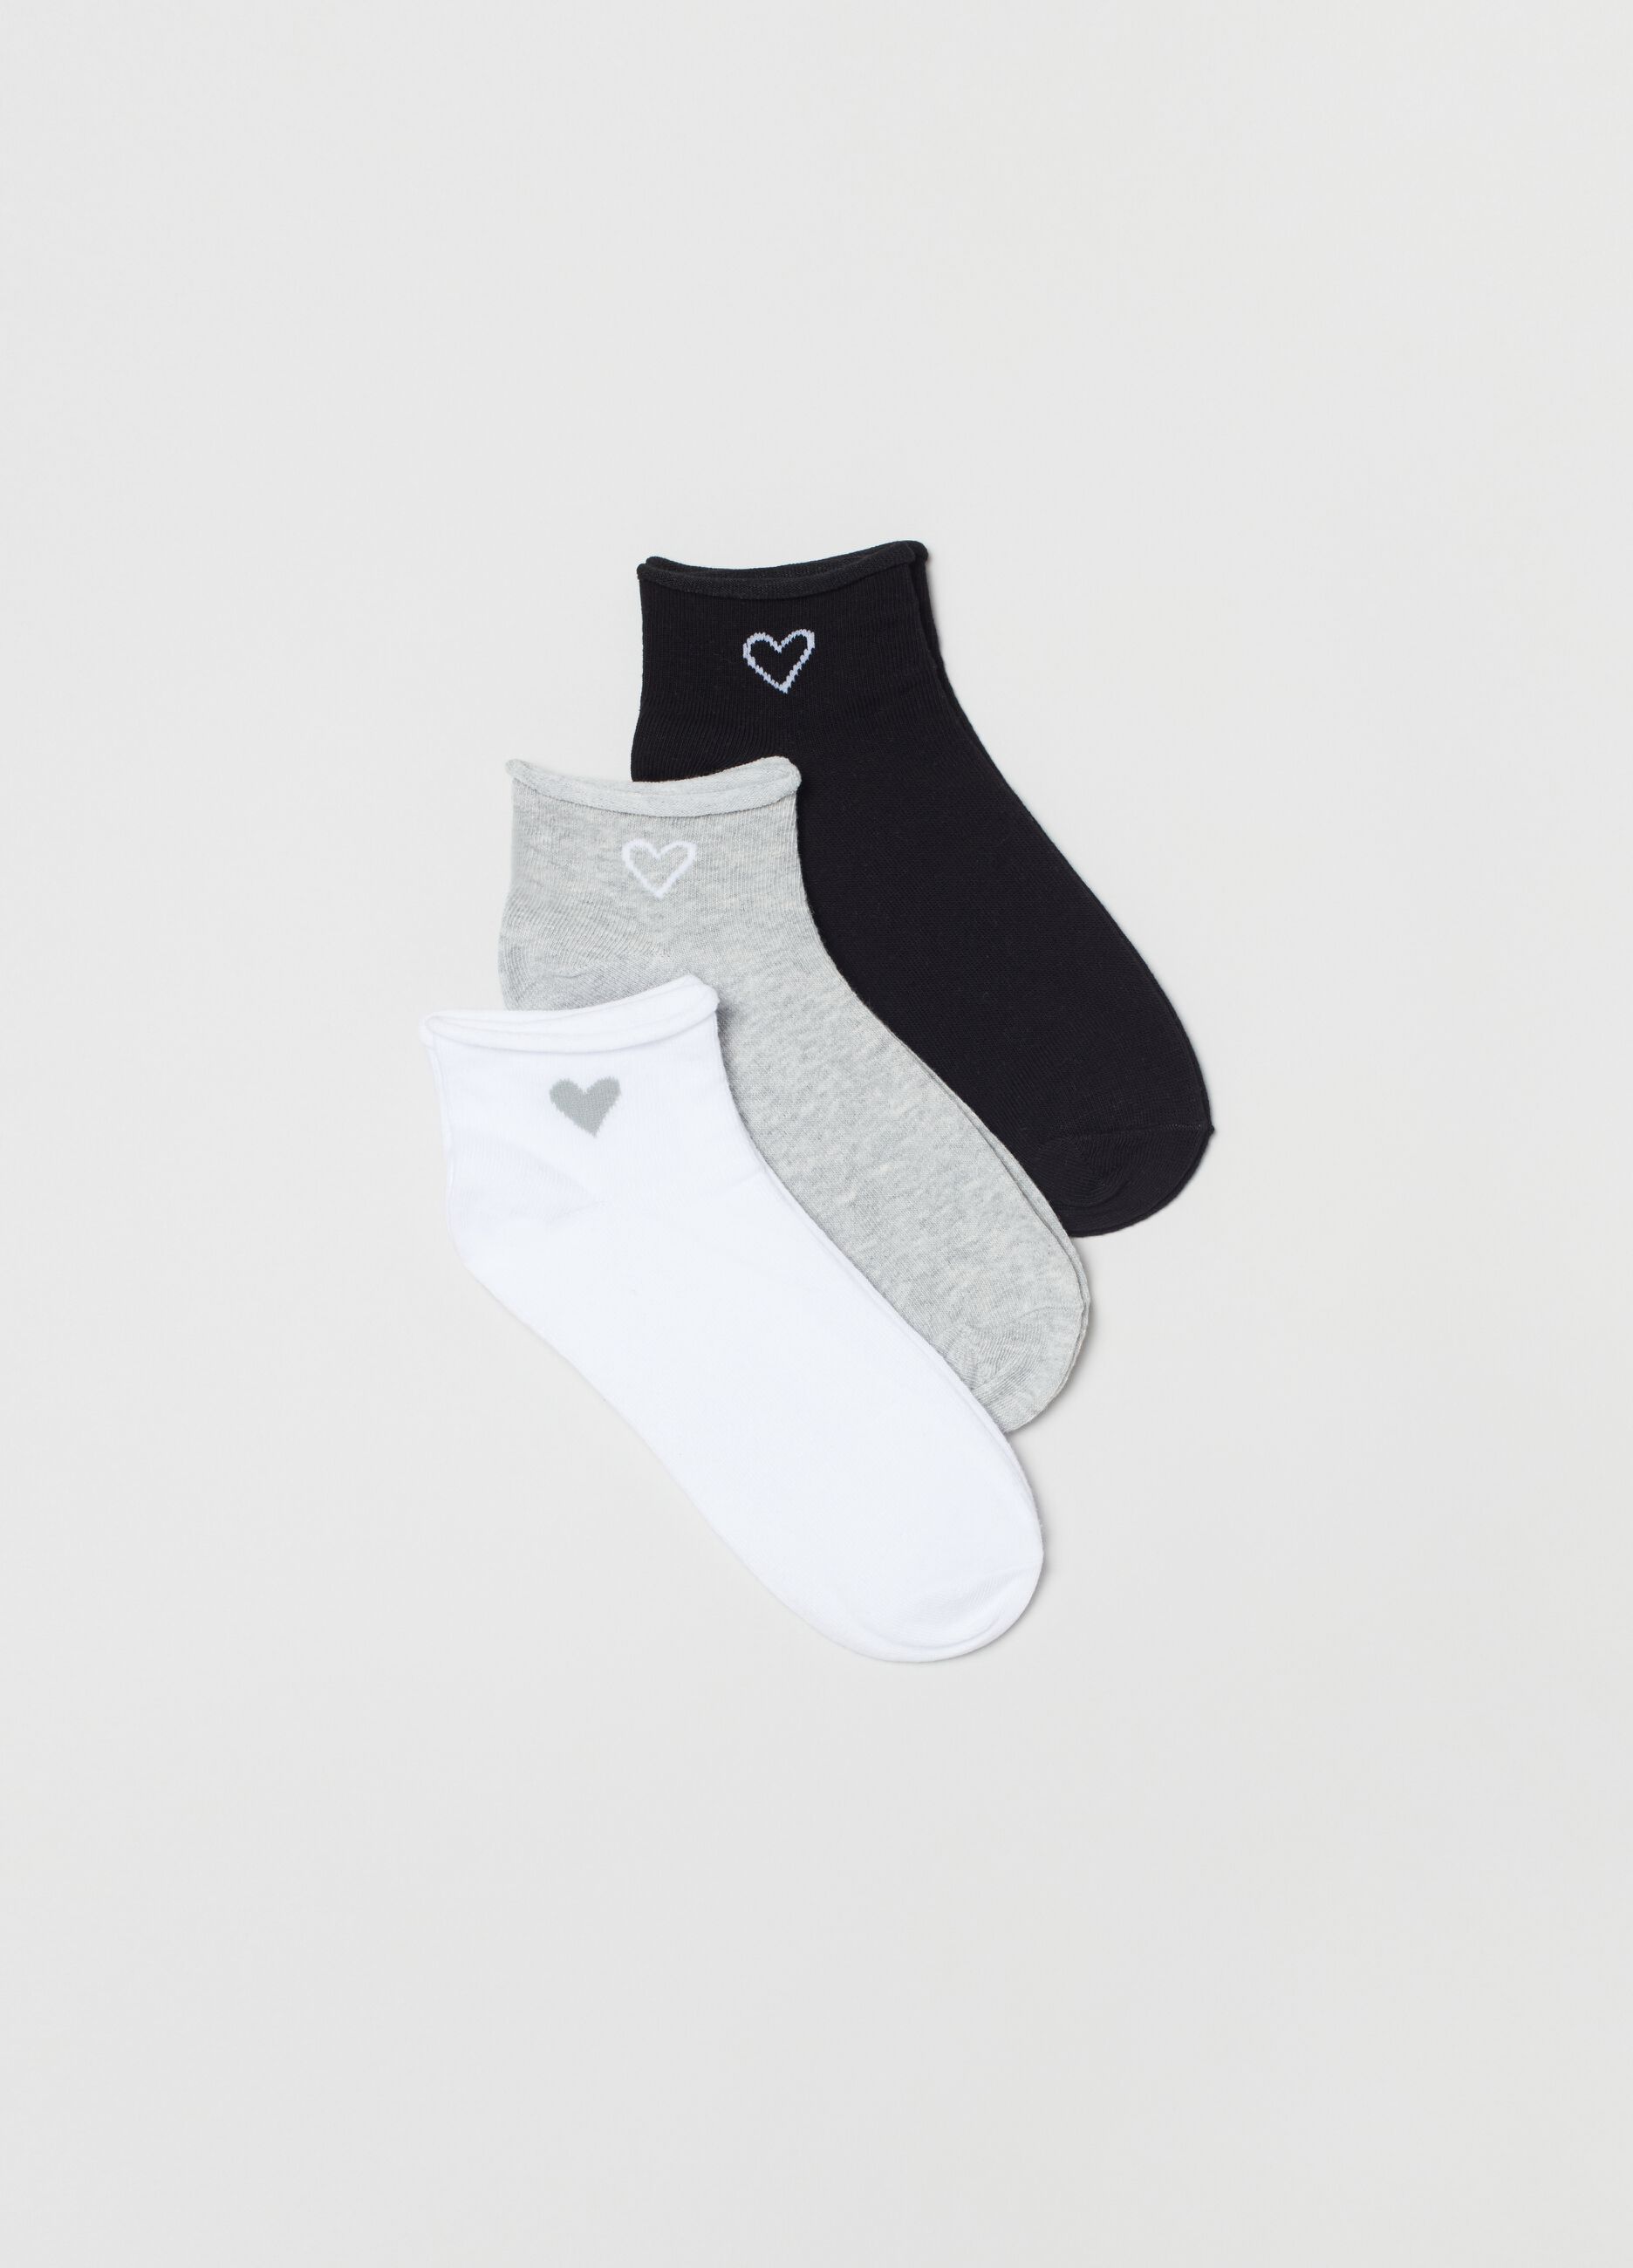 Three-pair pack shoe liners with heart design